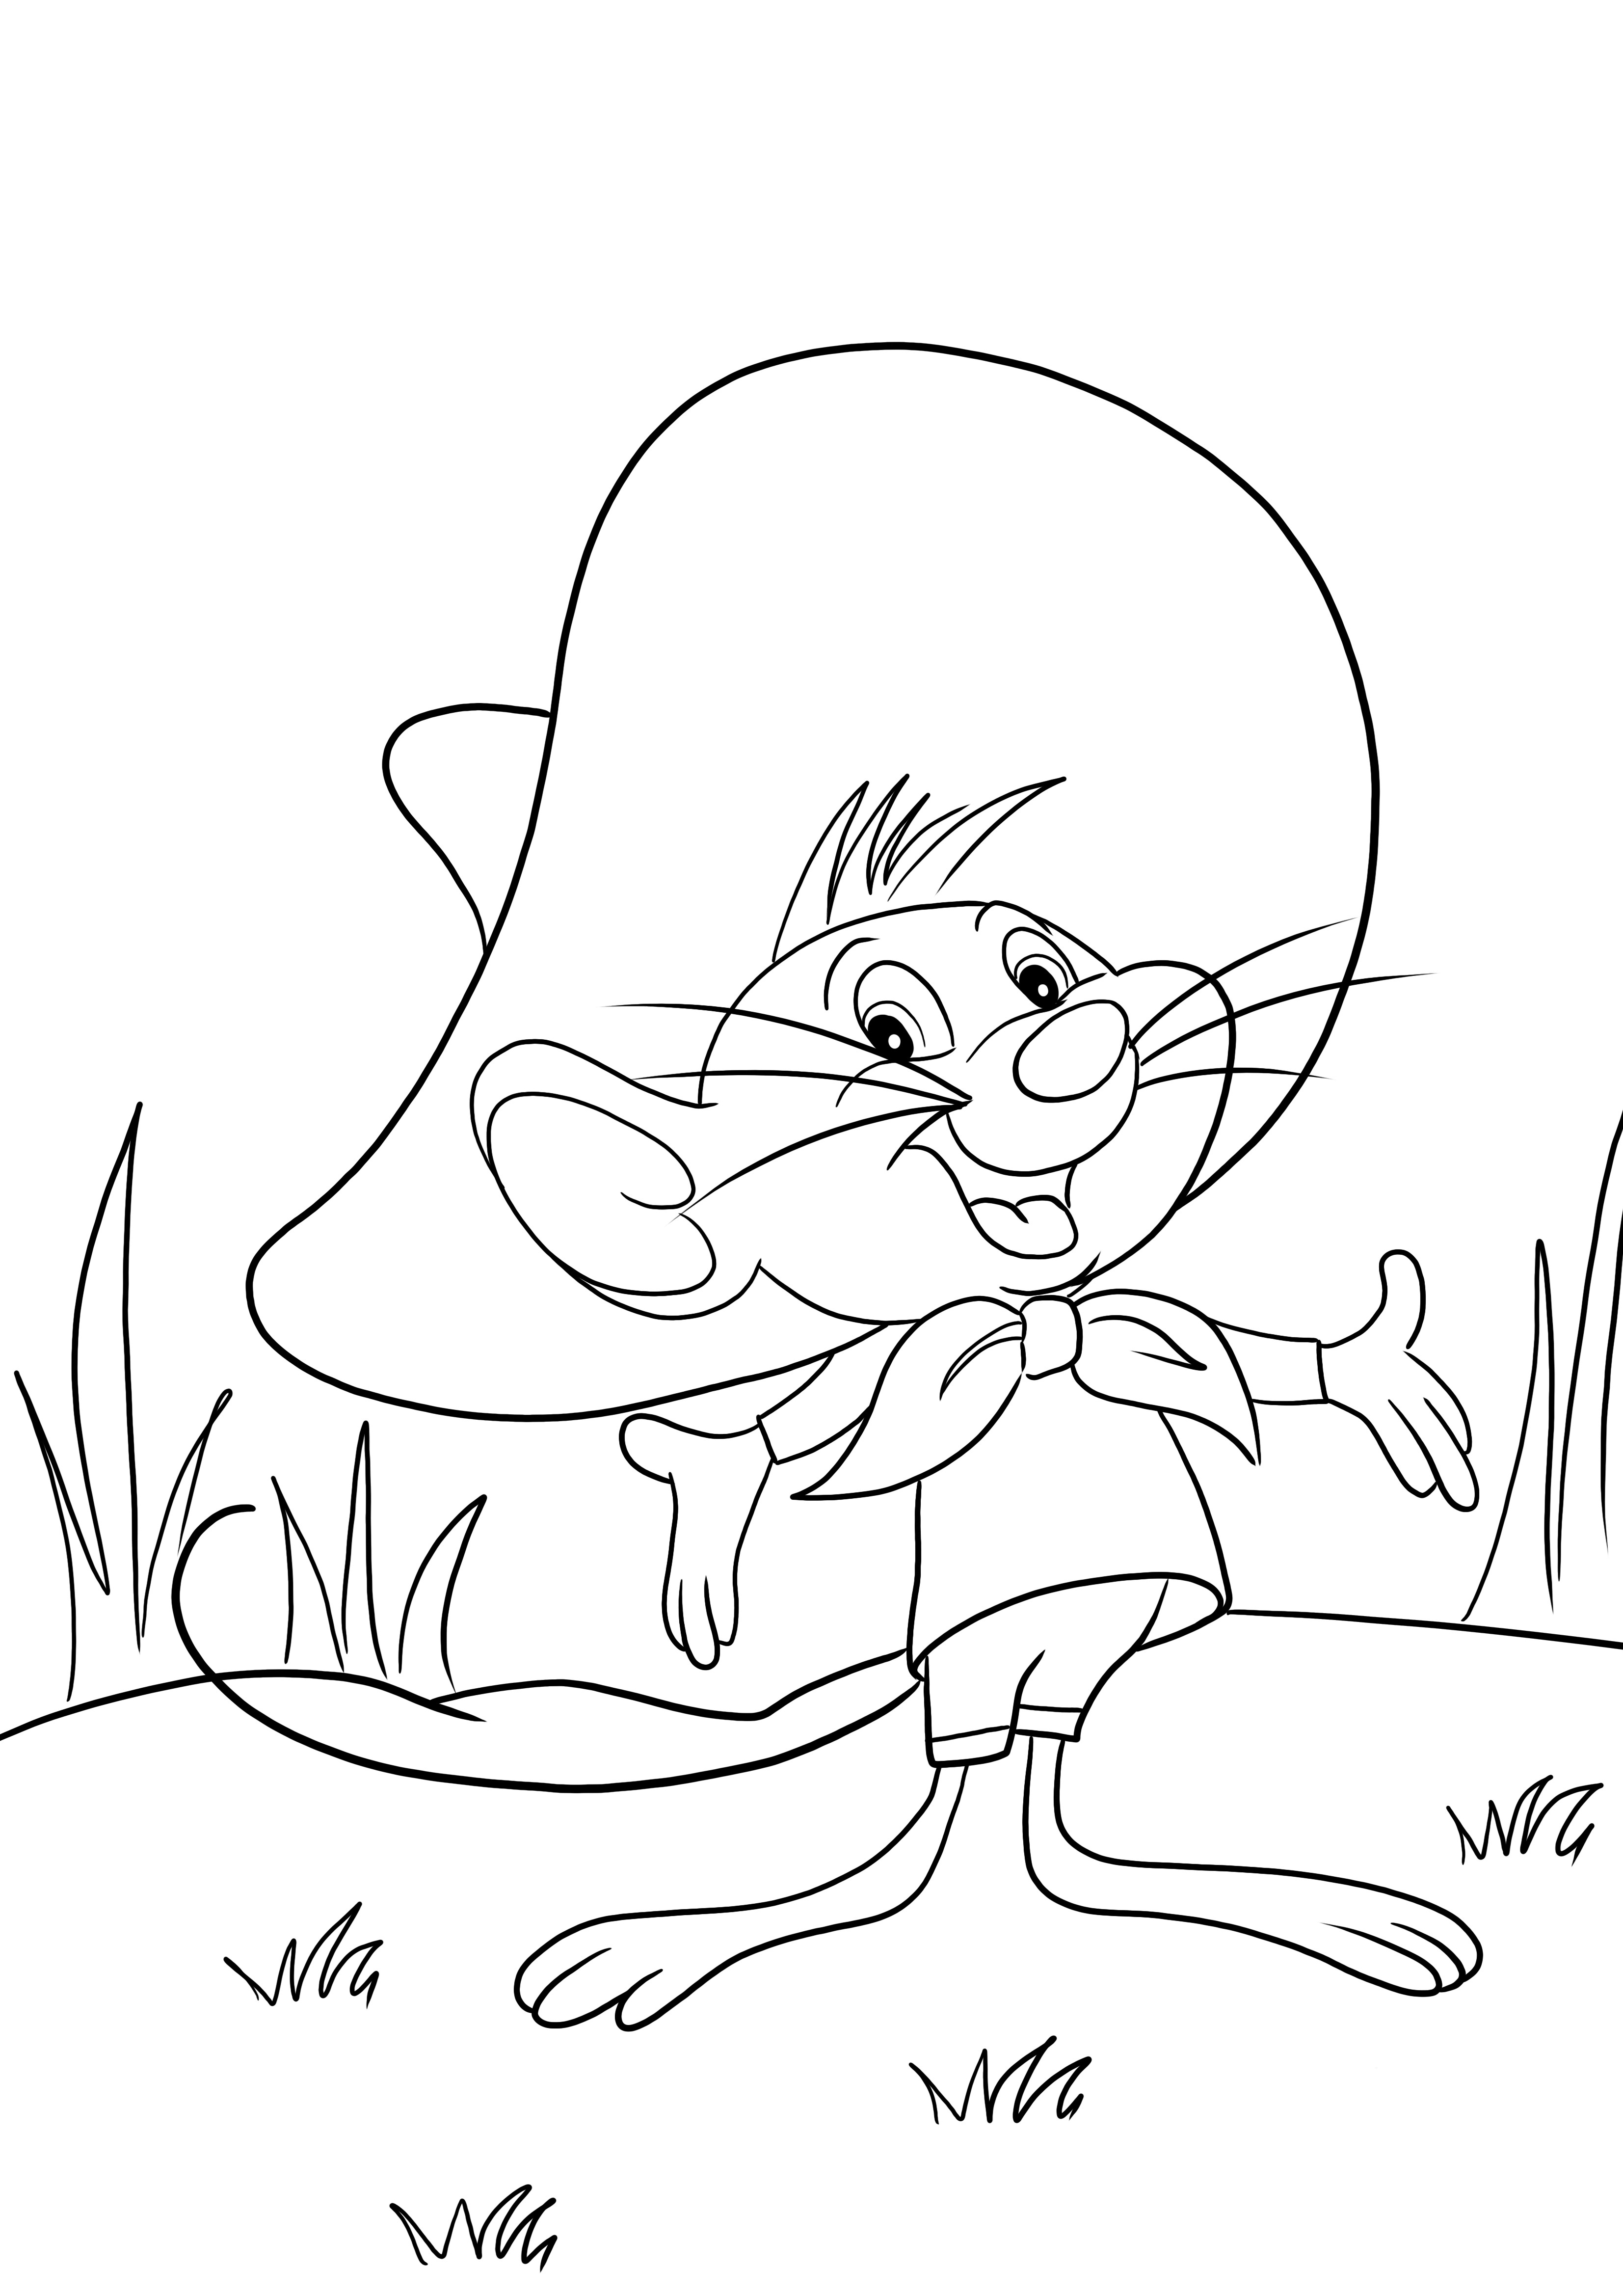 Our Looney Tunes favorite character Li'l Sneeze free printable for coloring